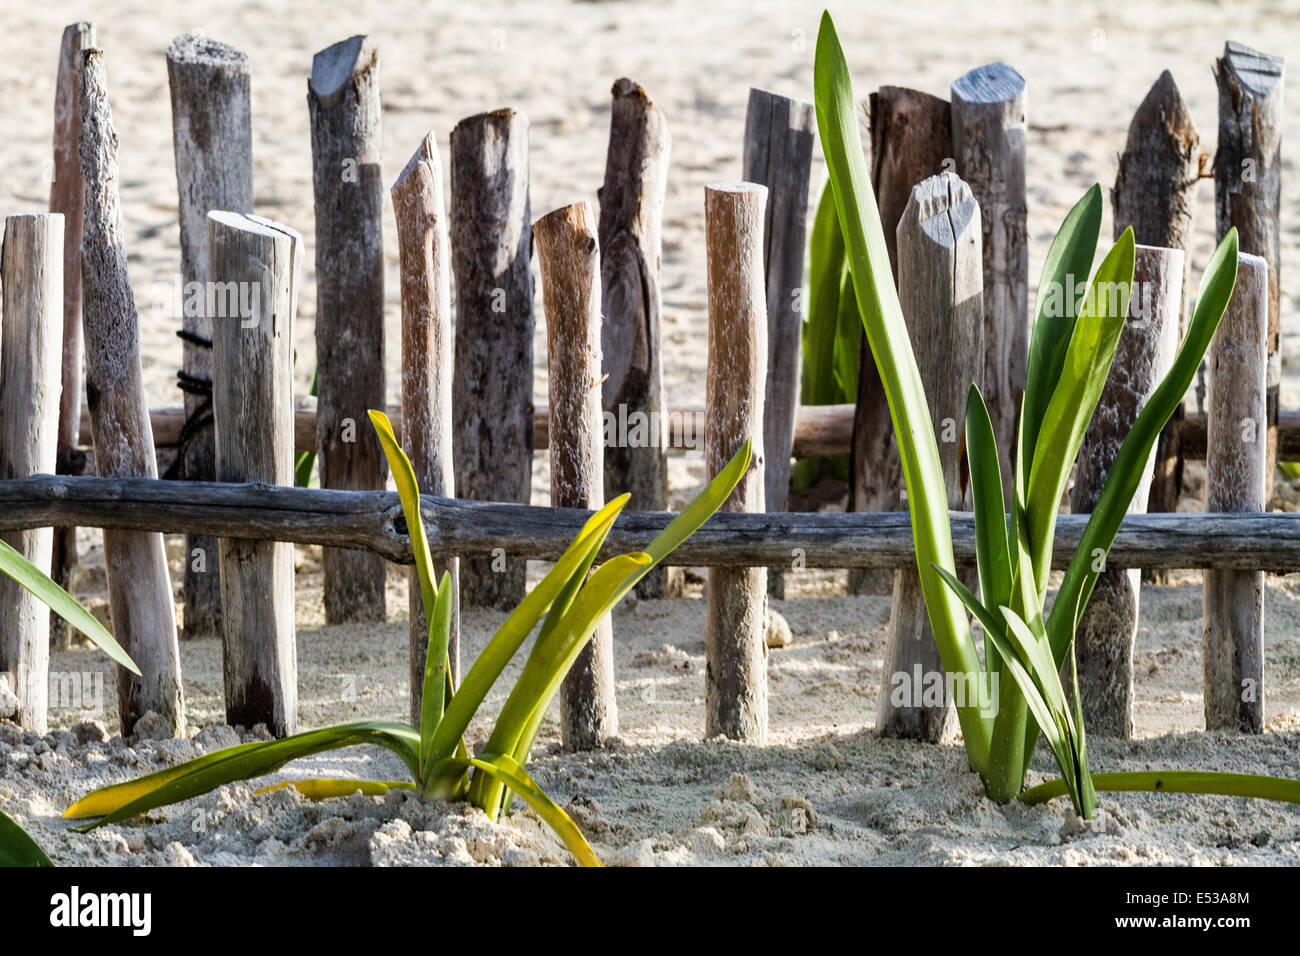 A fence of wooden sticks and plants on the sandy beach Stock Photo